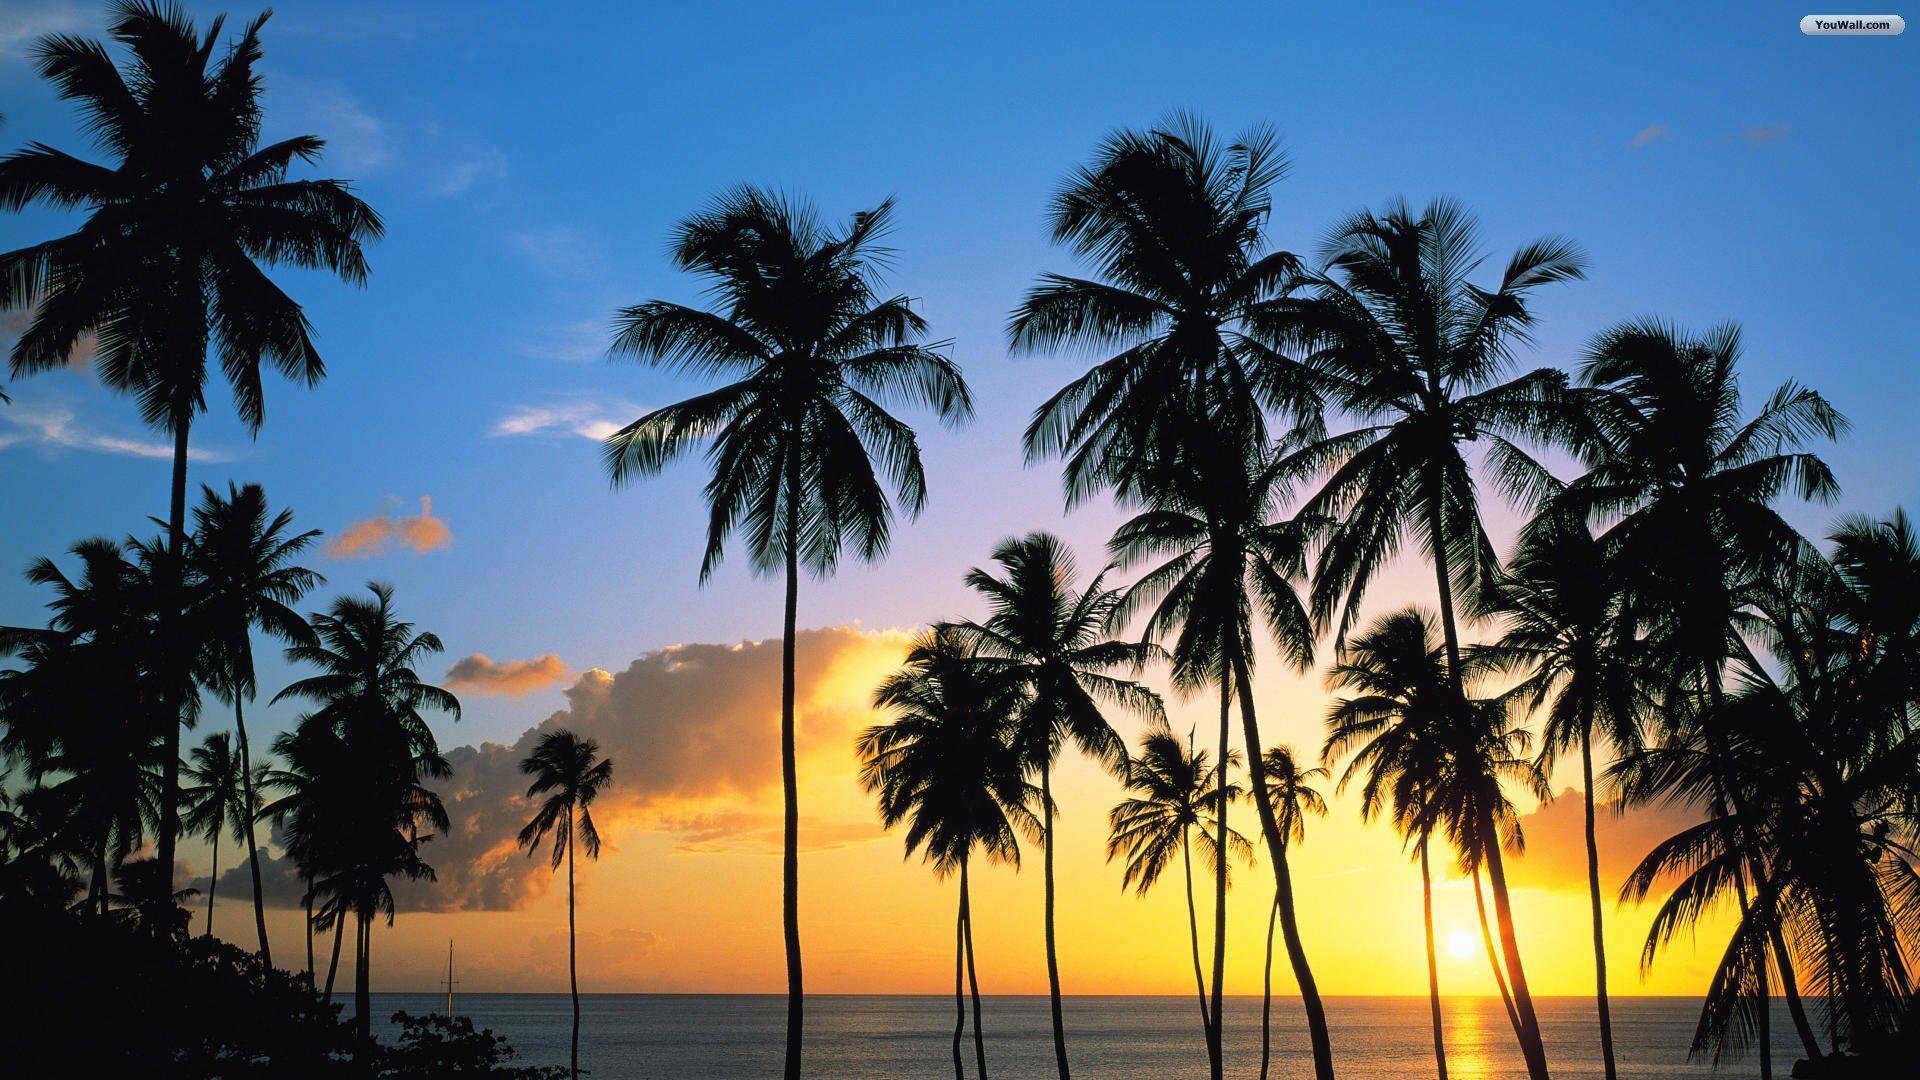 Tropical Sunsets Wallpaper, 36 Tropical Sunsets Background